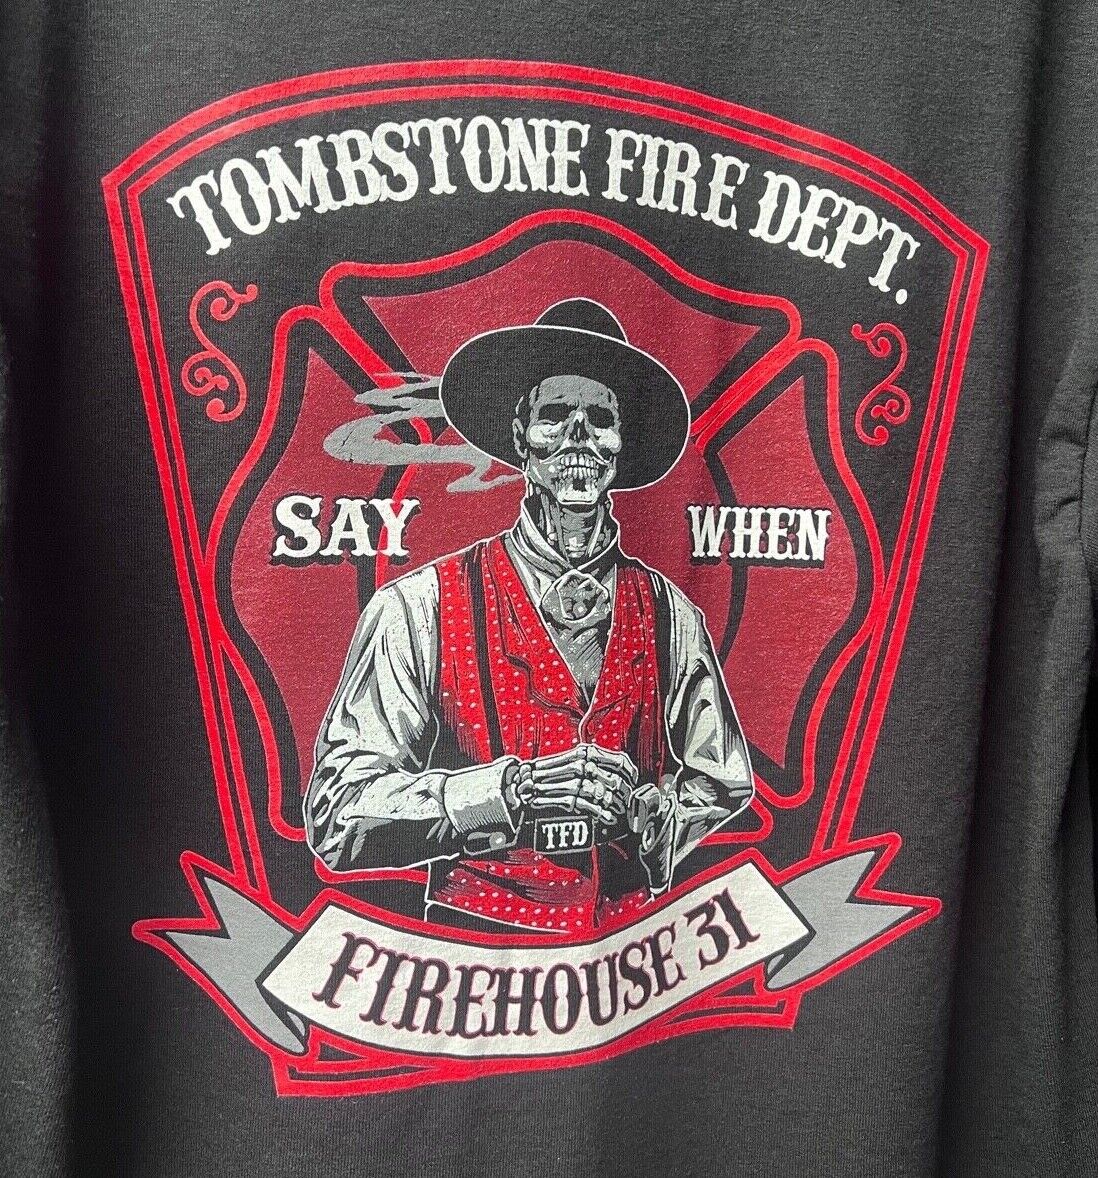 Tombstone Fire Department 'Doc Holliday' themed approved shirt.